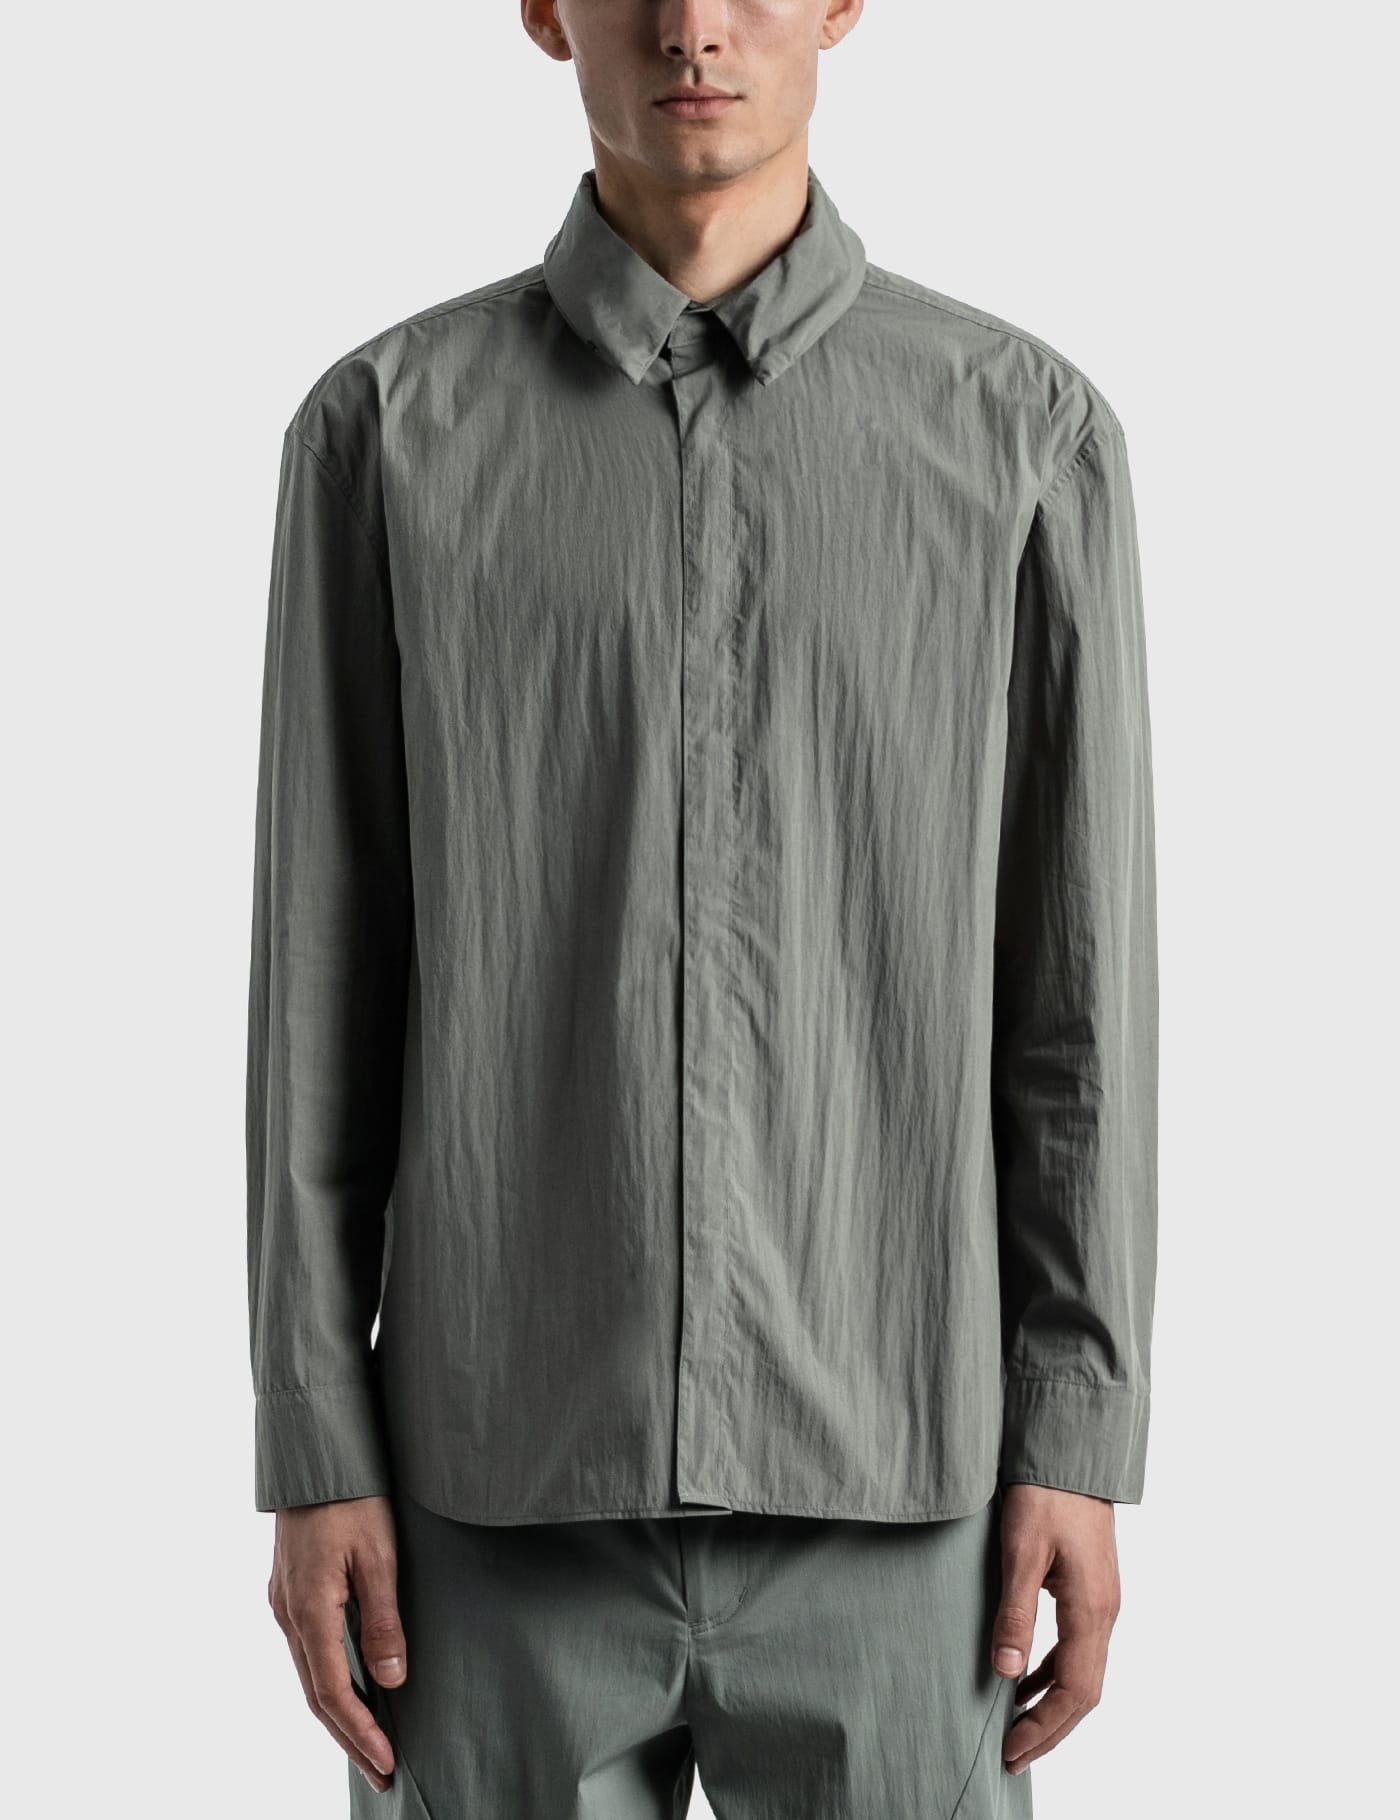 POST ARCHIVE FACTION (PAF) - 4.0 Shirt Right | HBX - Globally 